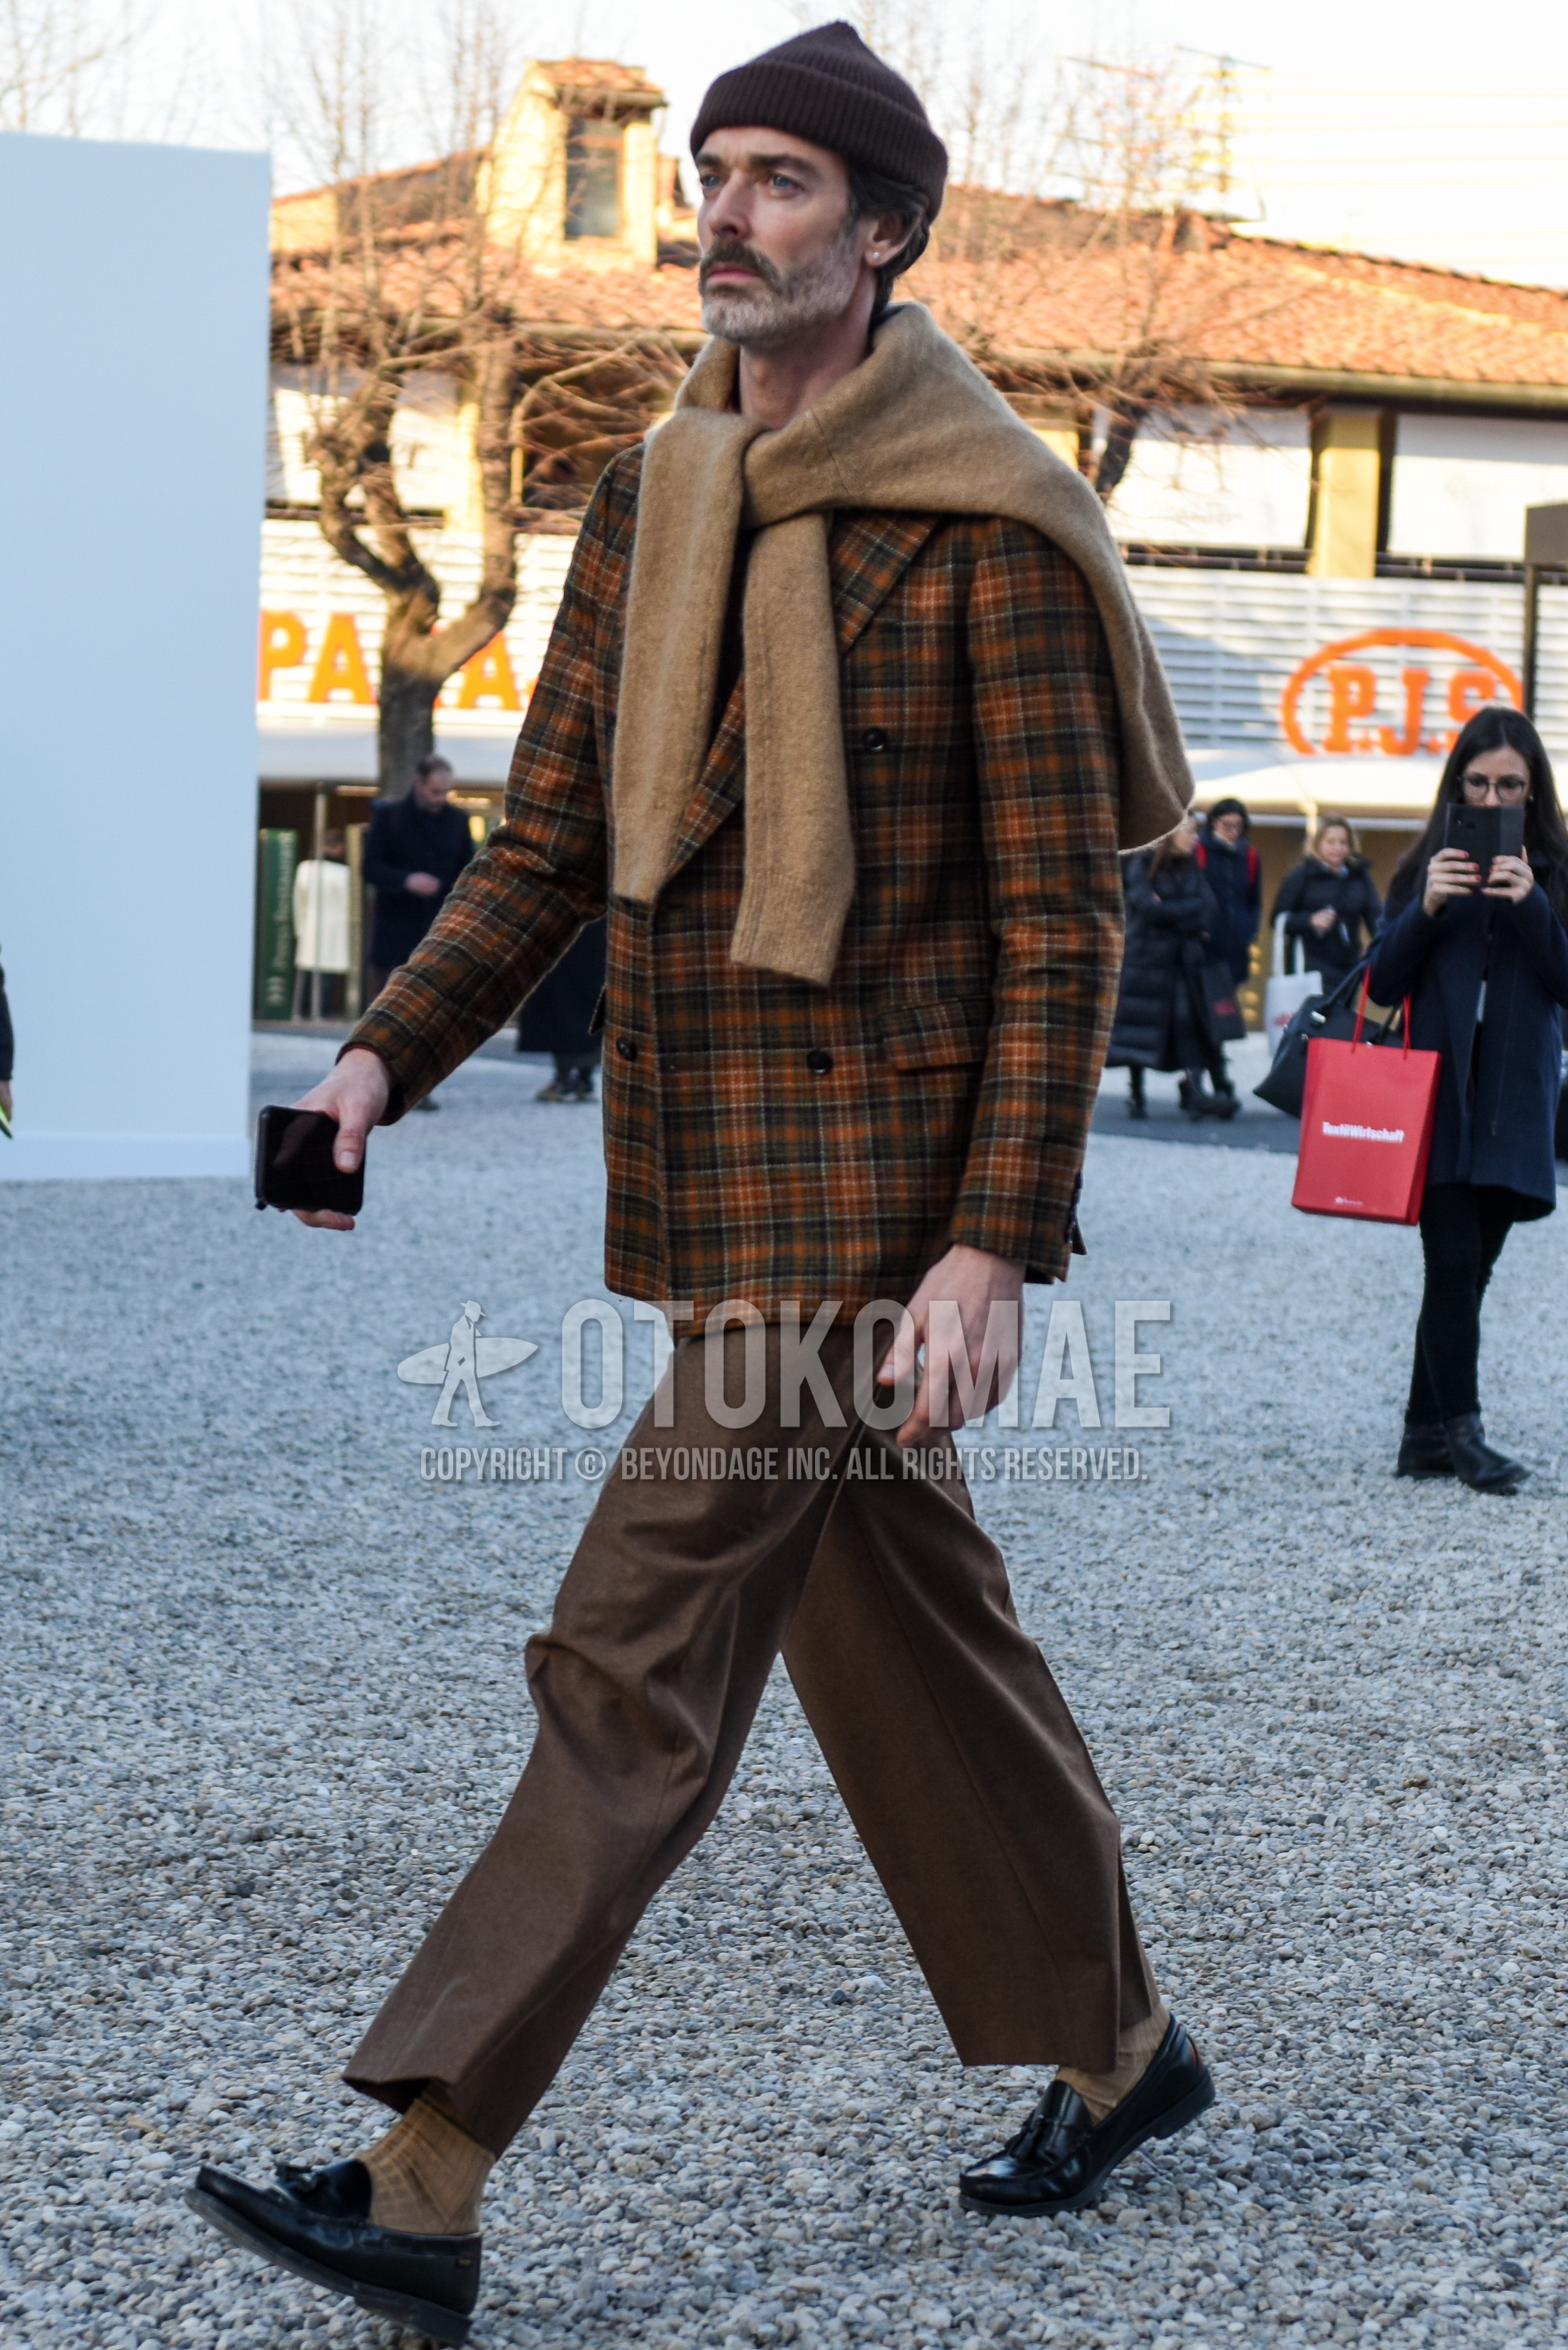 Men's spring autumn outfit with brown plain knit cap, beige plain sweater, brown check tailored jacket, brown plain slacks, brown plain ankle pants, beige plain socks, black tassel loafers leather shoes.